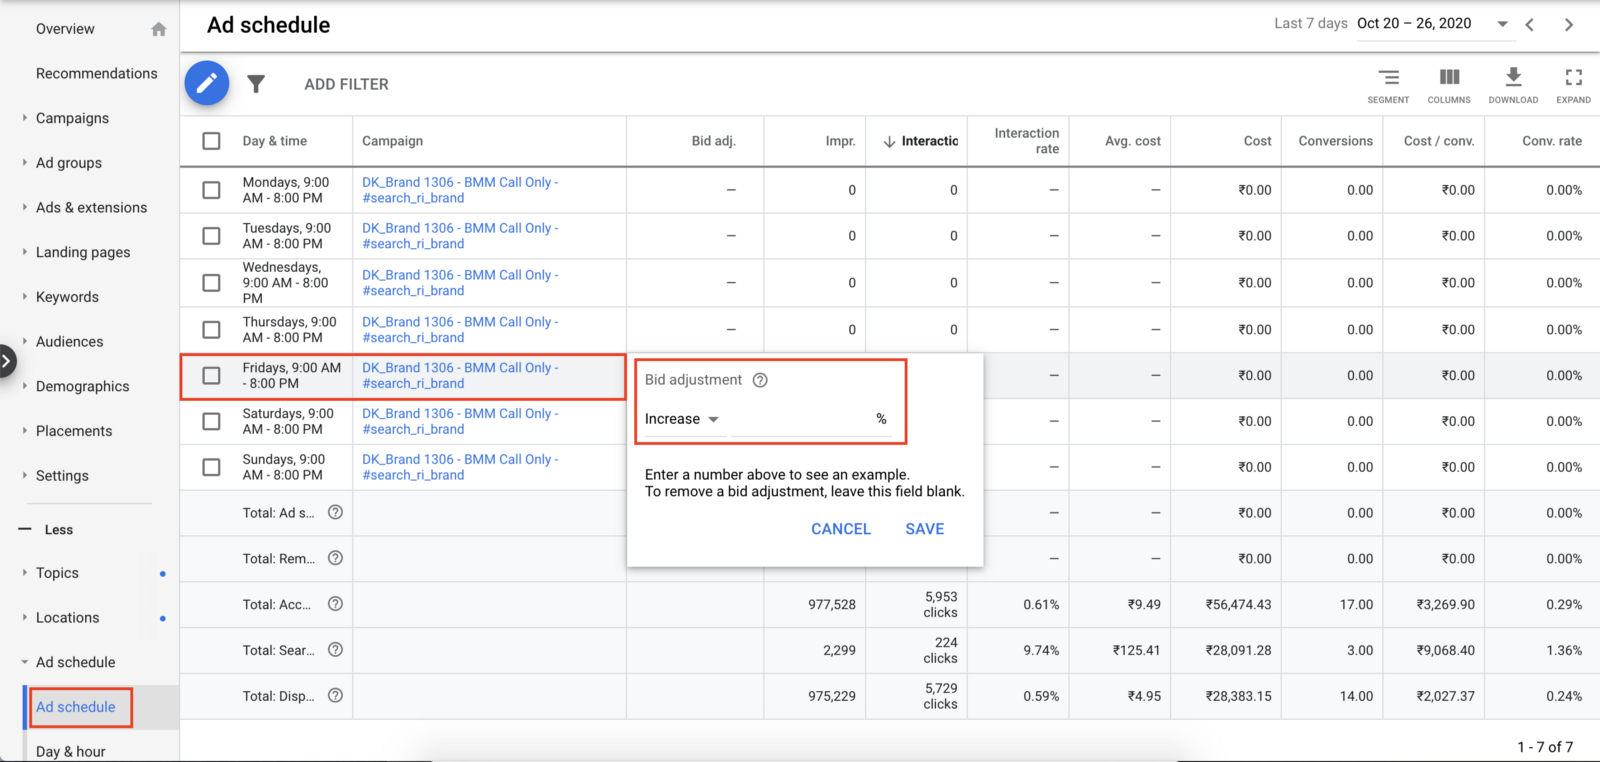 Option to adjust your bids as per timings in Google Ad Schedule